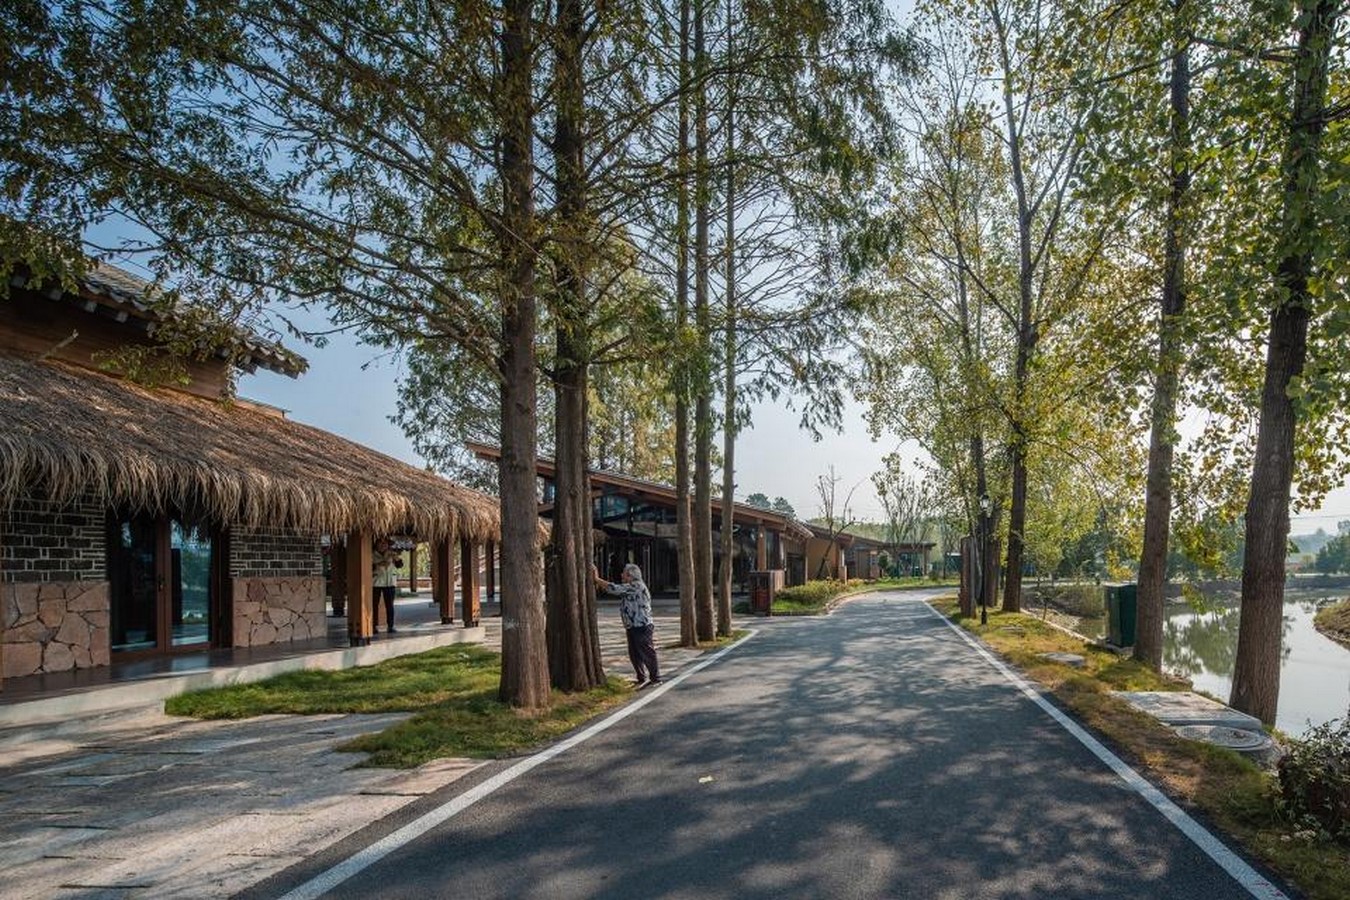 Lixiang Village Public Space By AESEU Architectural Technology and Art studio - Sheet6